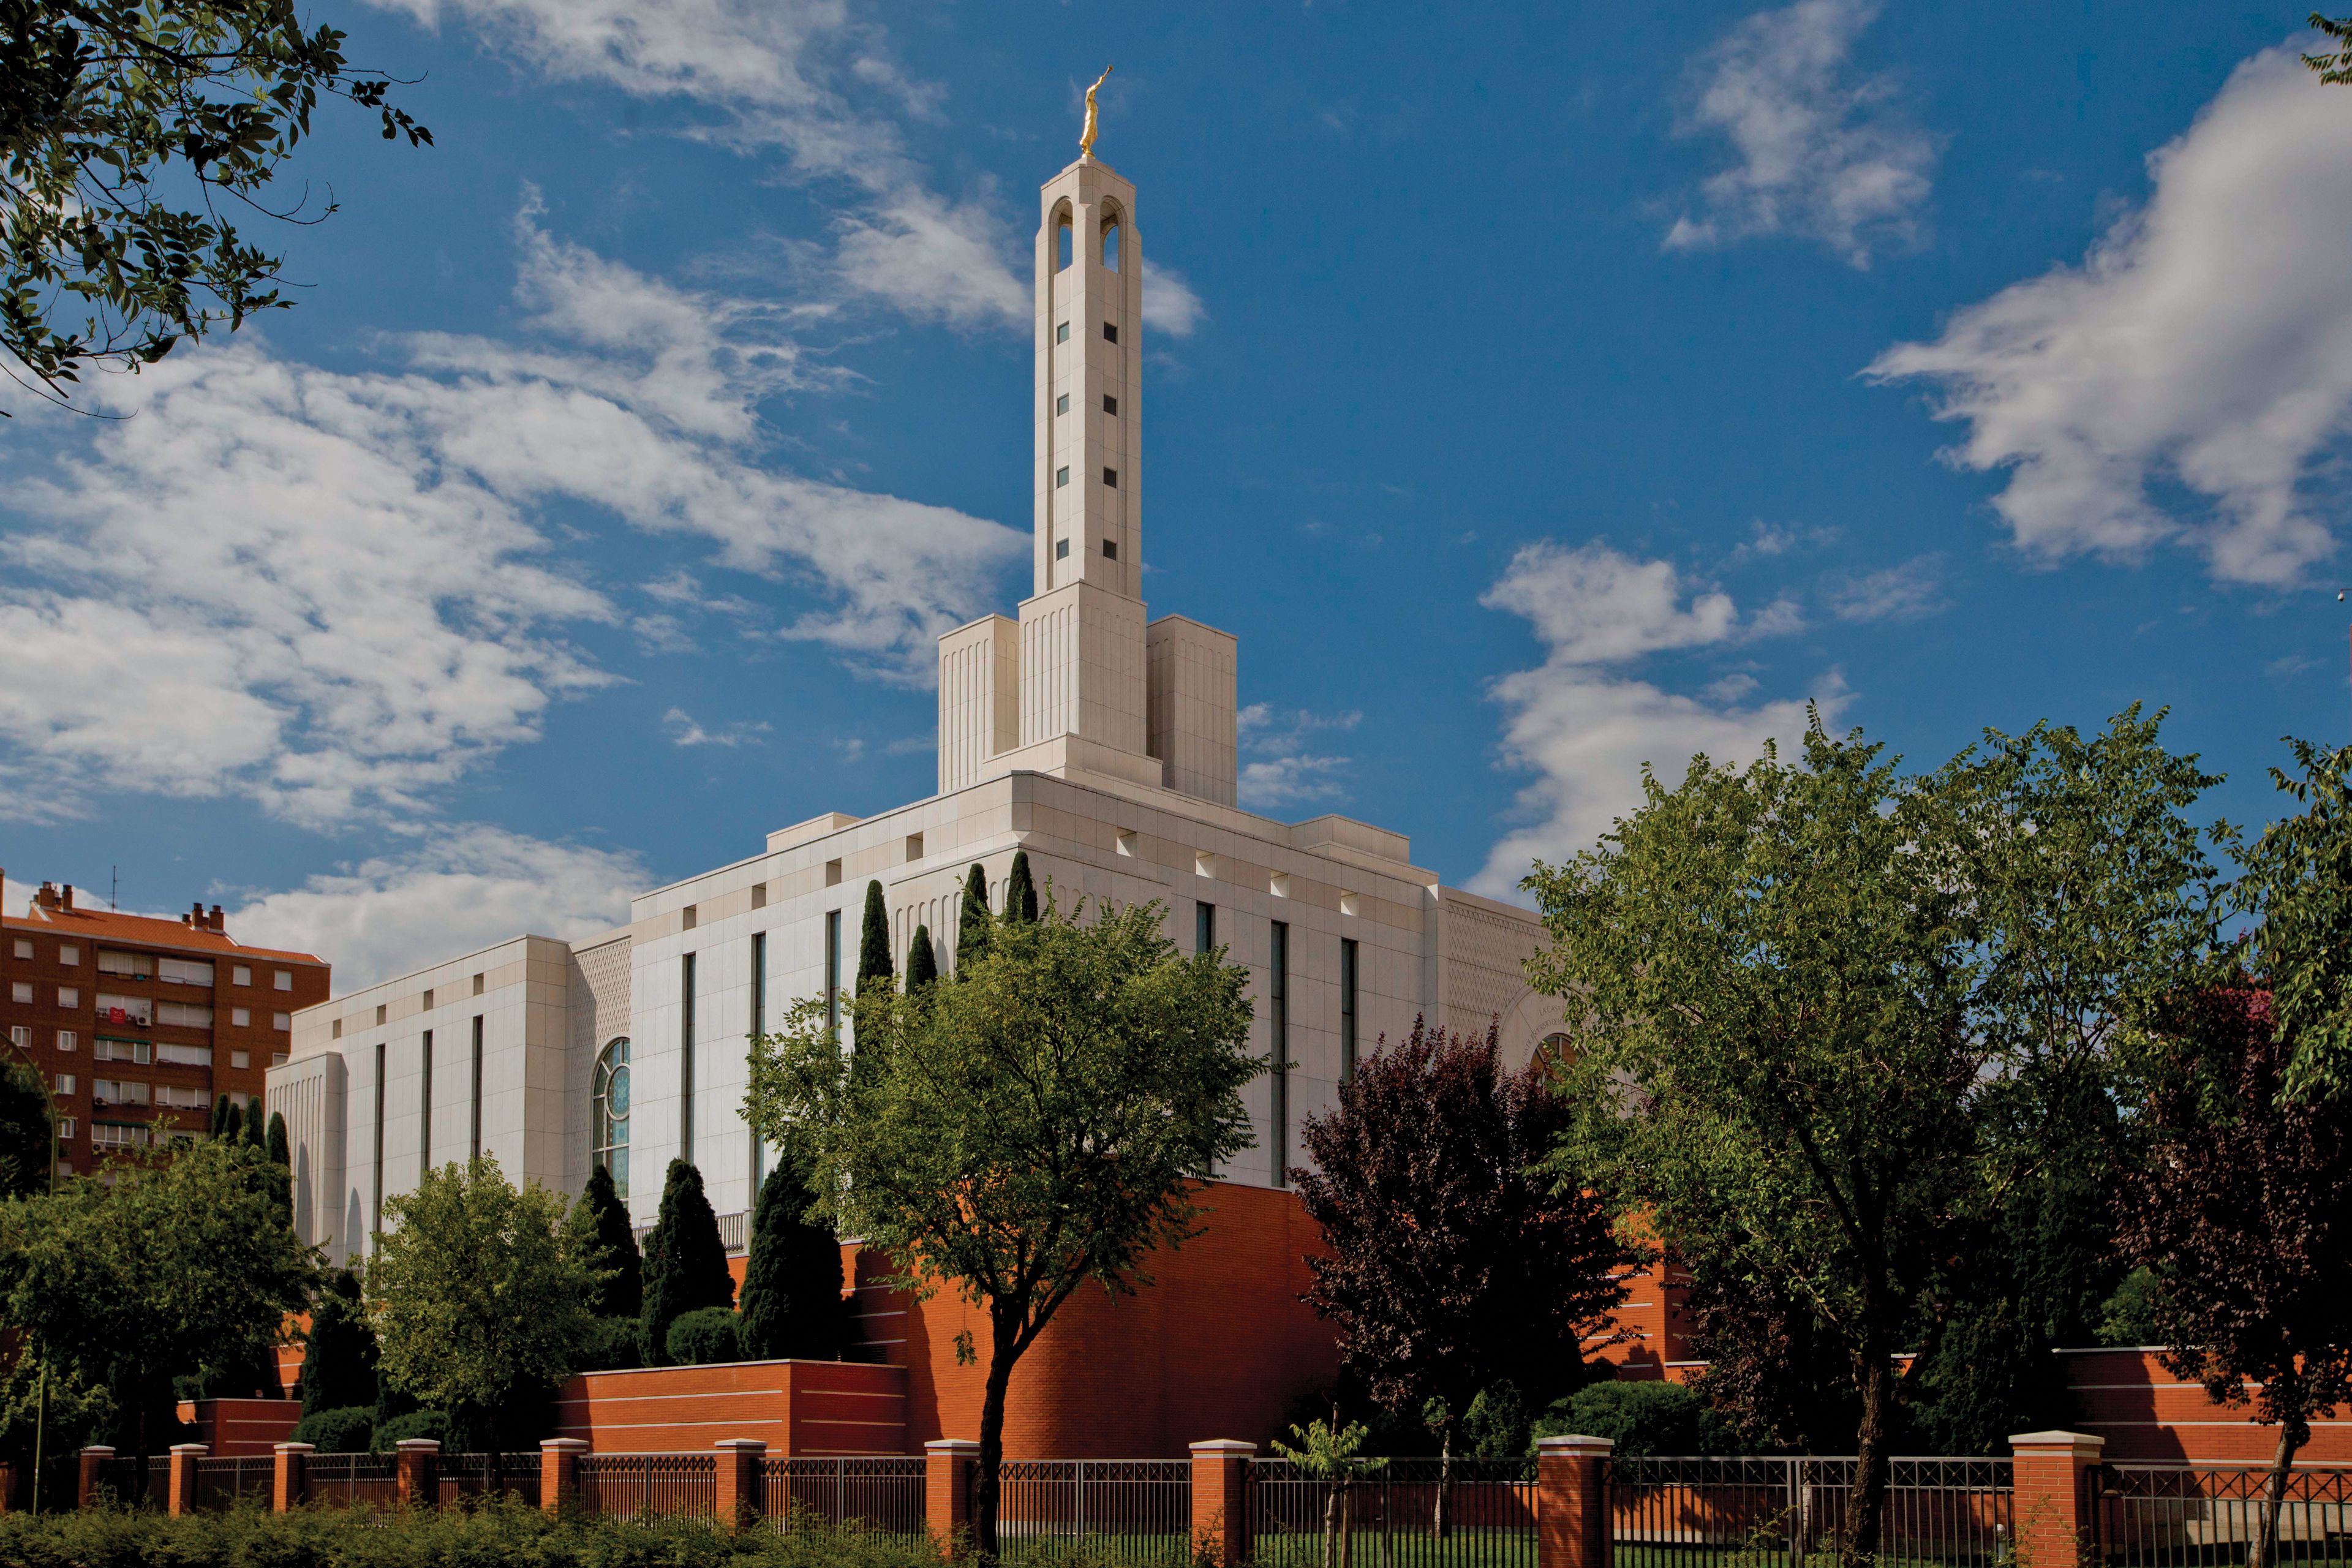 The Madrid Spain Temple, including scenery and the exterior of the temple.